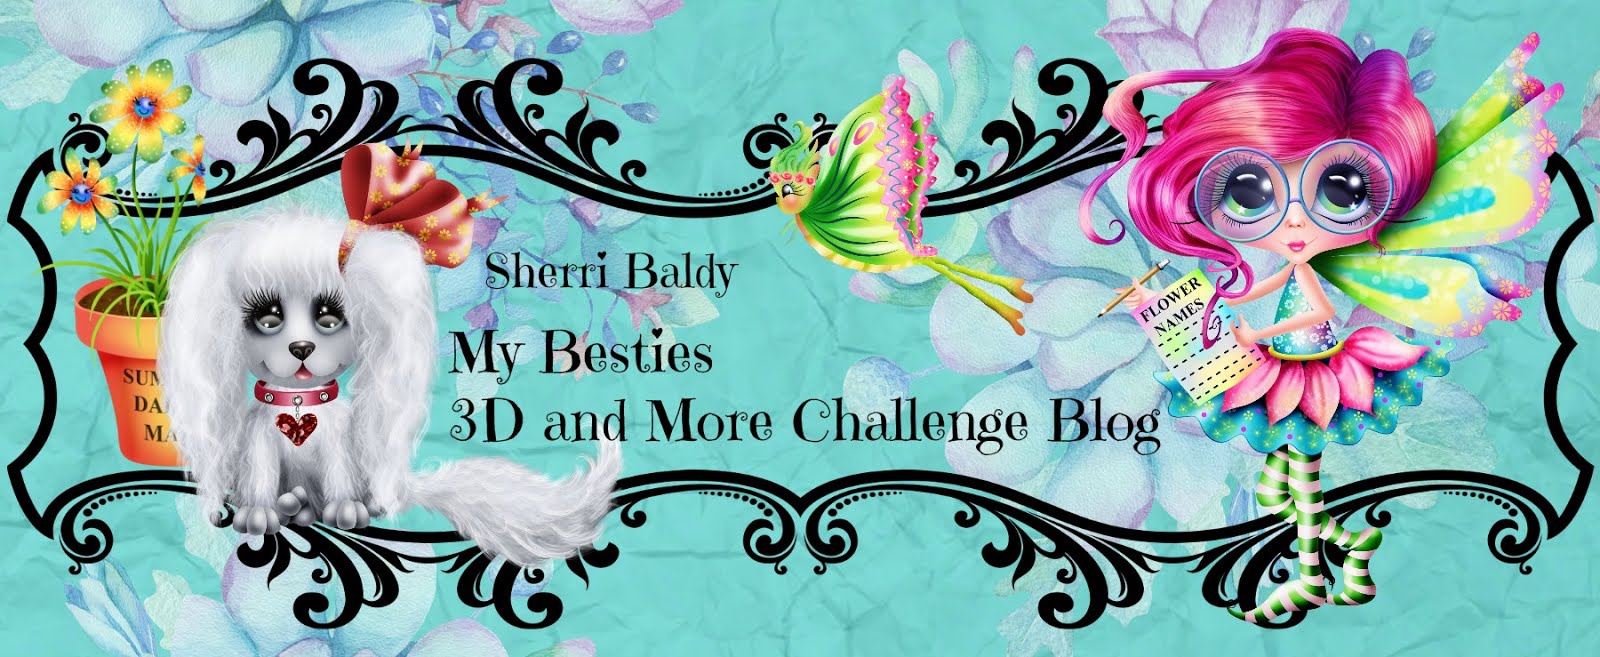 My Besties 3D and More Challenge - Click the photo to visit us!